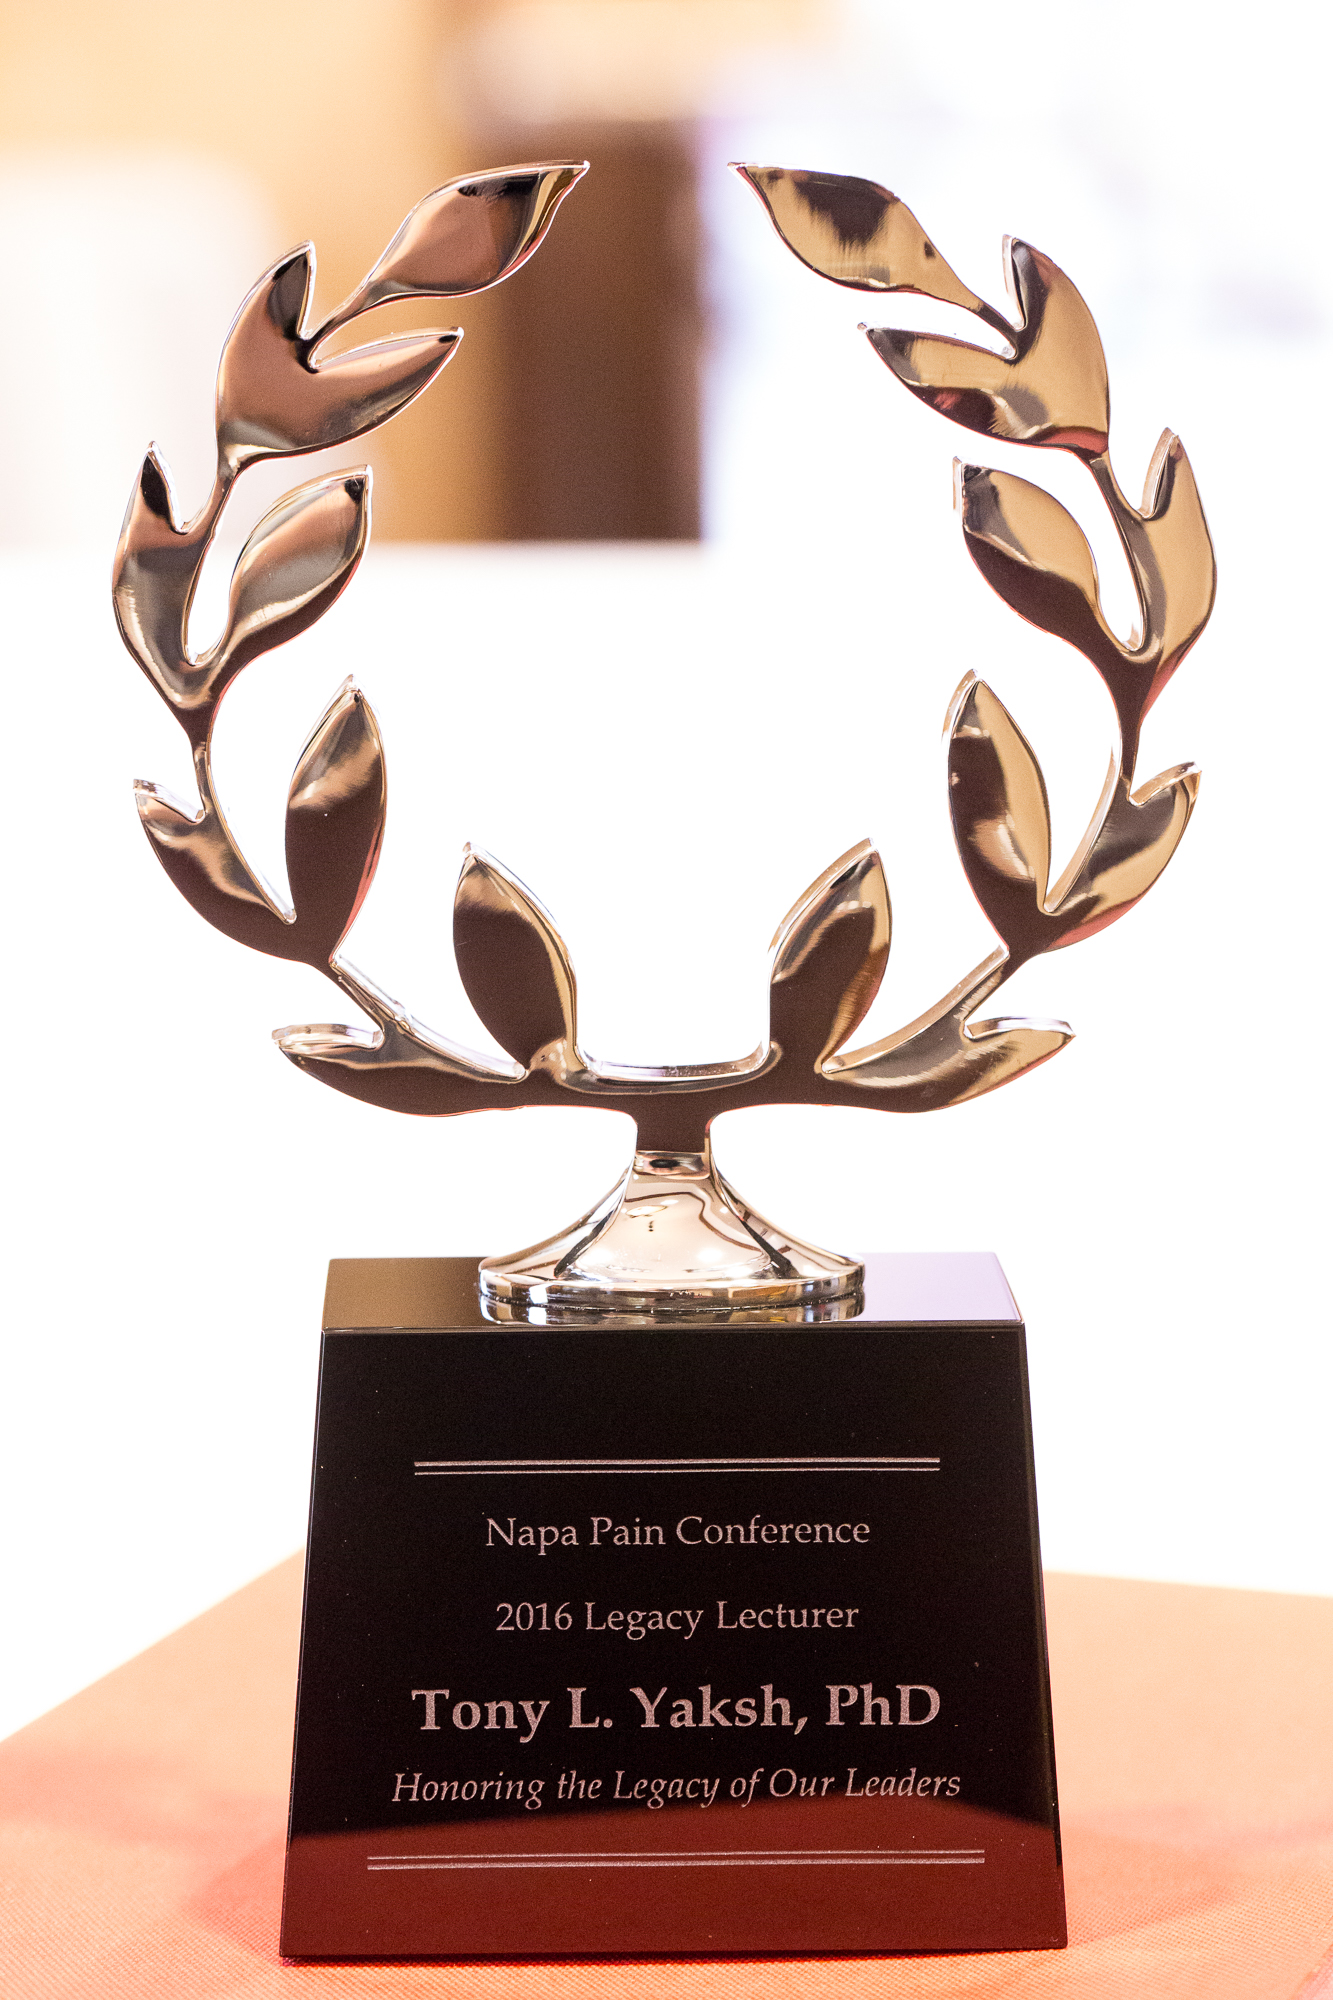 Napa Pain Conference Legacy Lecture Award